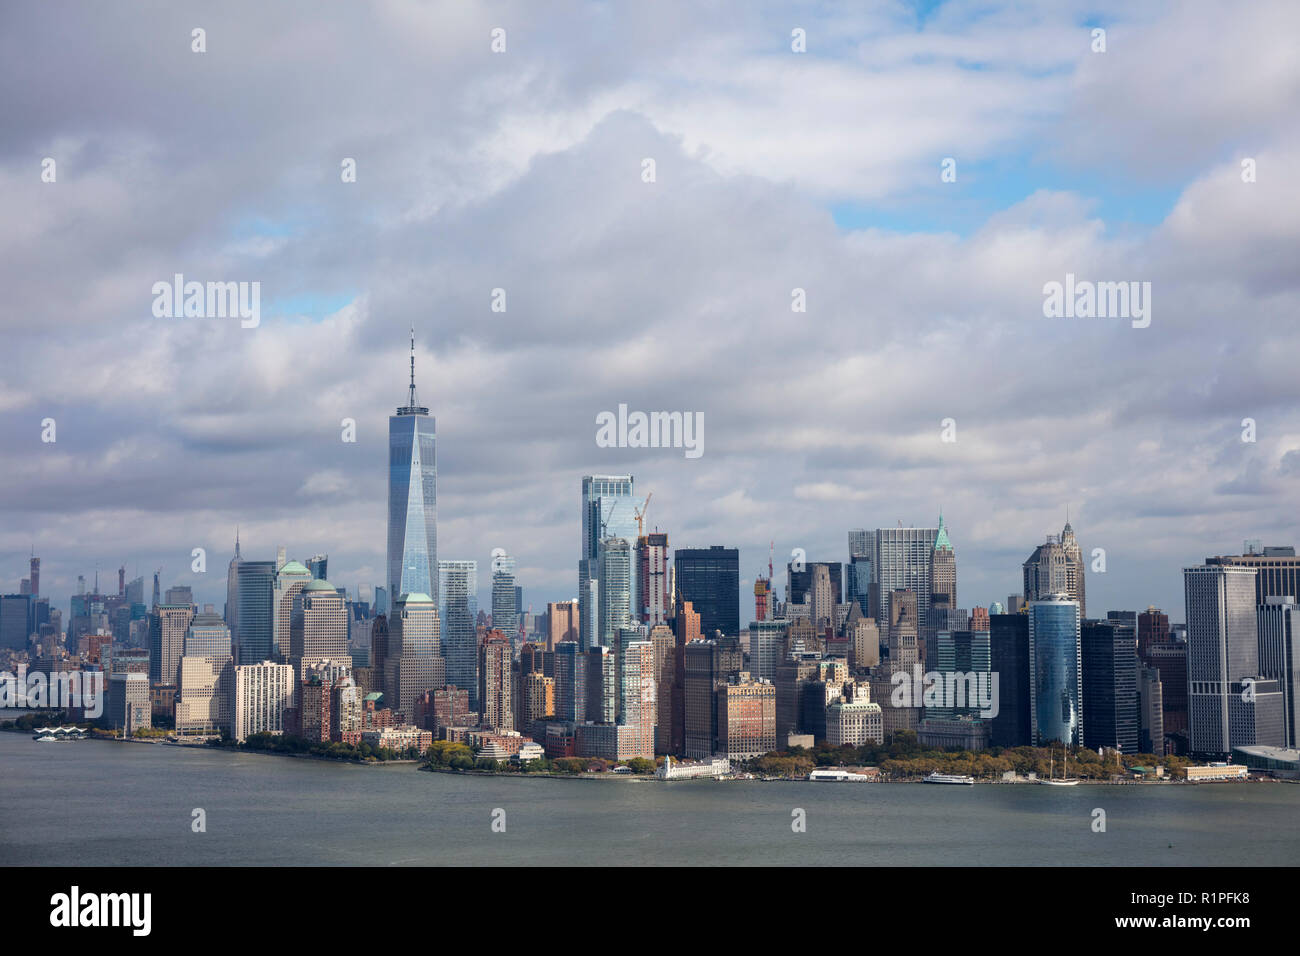 aerial view of Lower Manhattan and financial district skyscrapers, New York City, USA Stock Photo